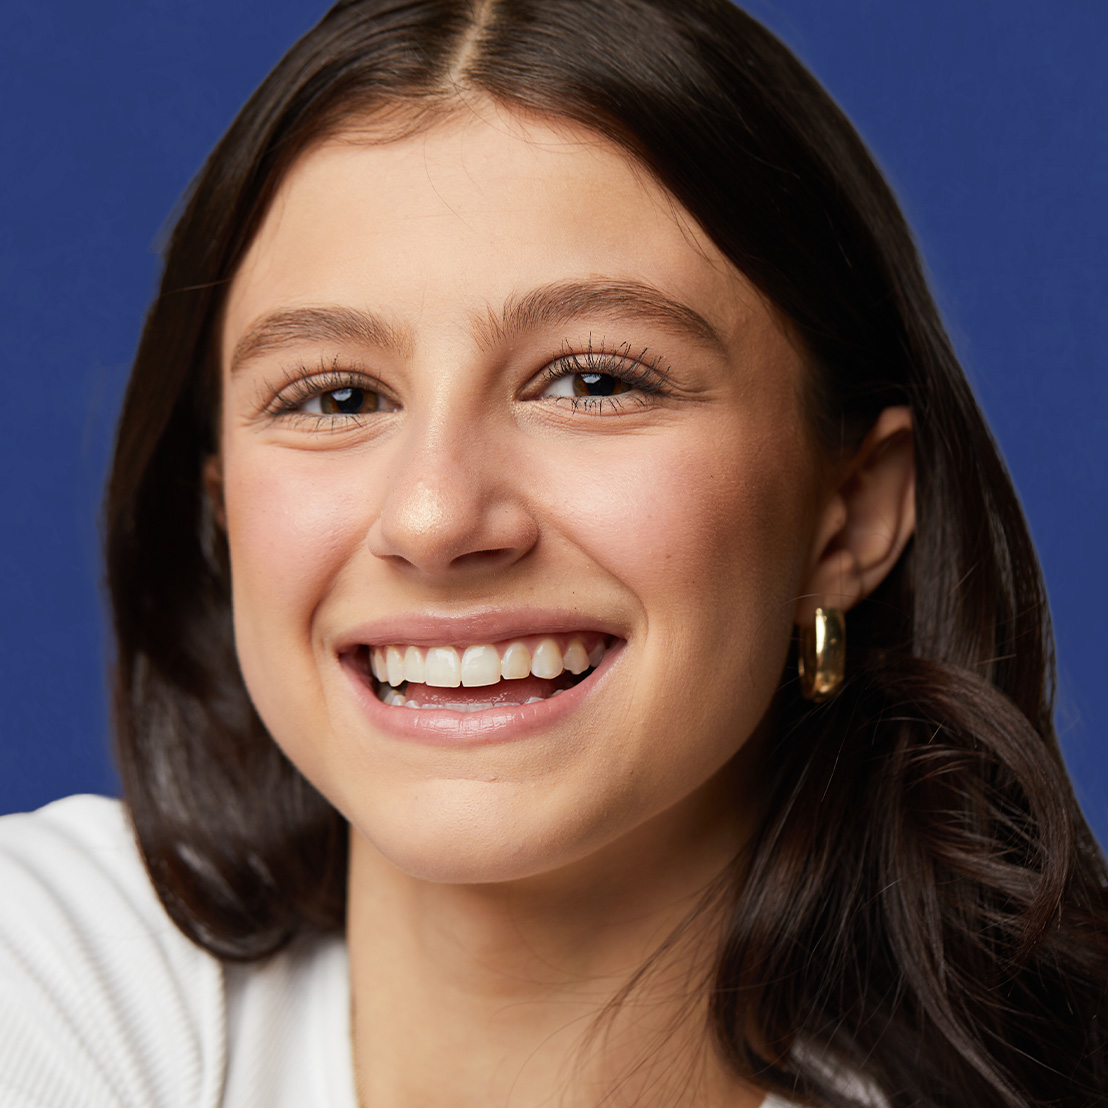 Teen smiling after Invisalign treatment in Kenilworth IL | Shoreview Orthodontics